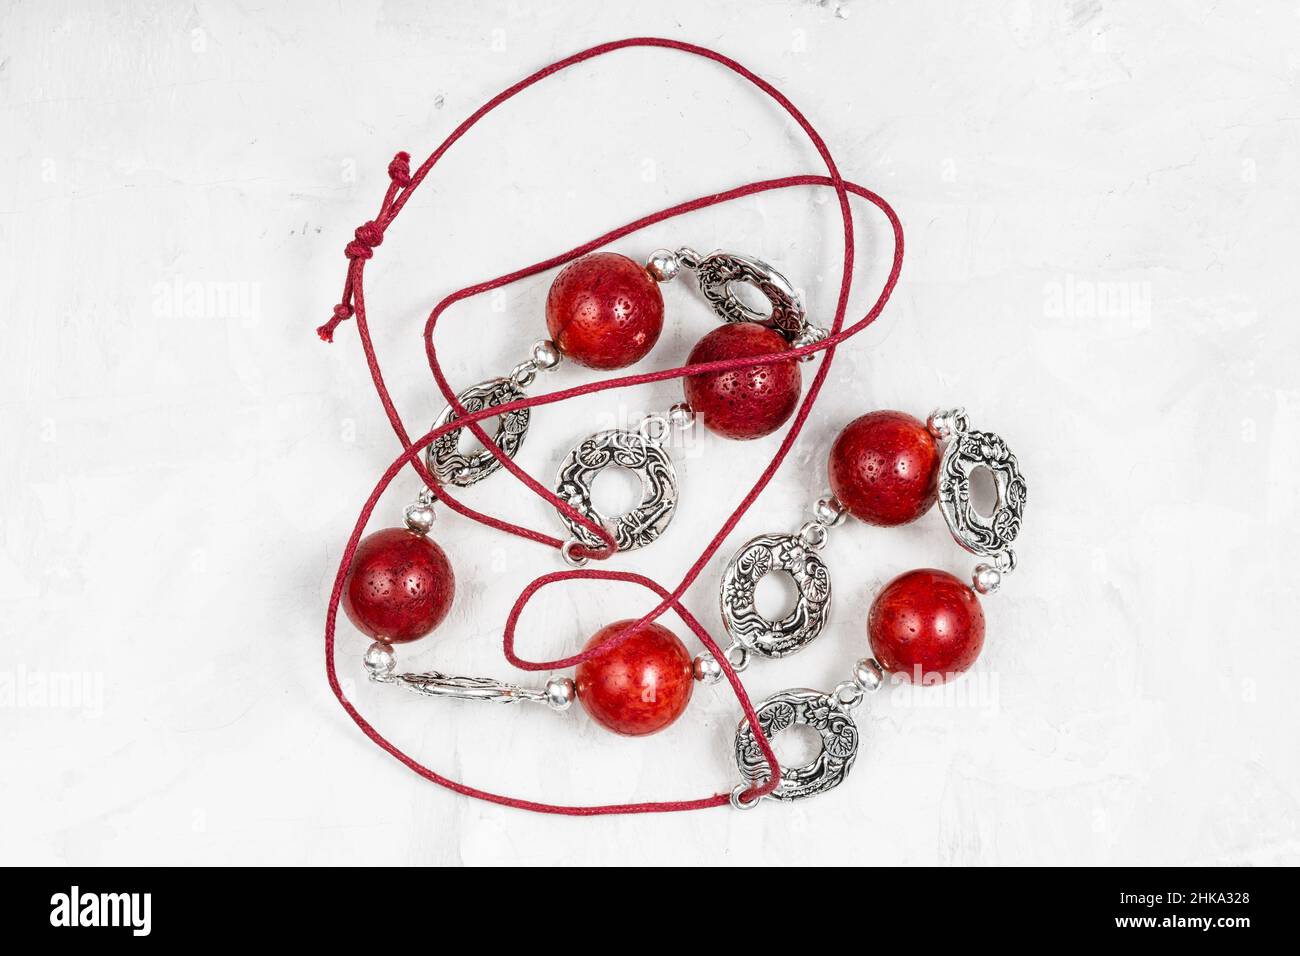 tangled handcrafted necklace of polished red coral balls and decorated silver rings on red leather cord on gray concrete board Stock Photo